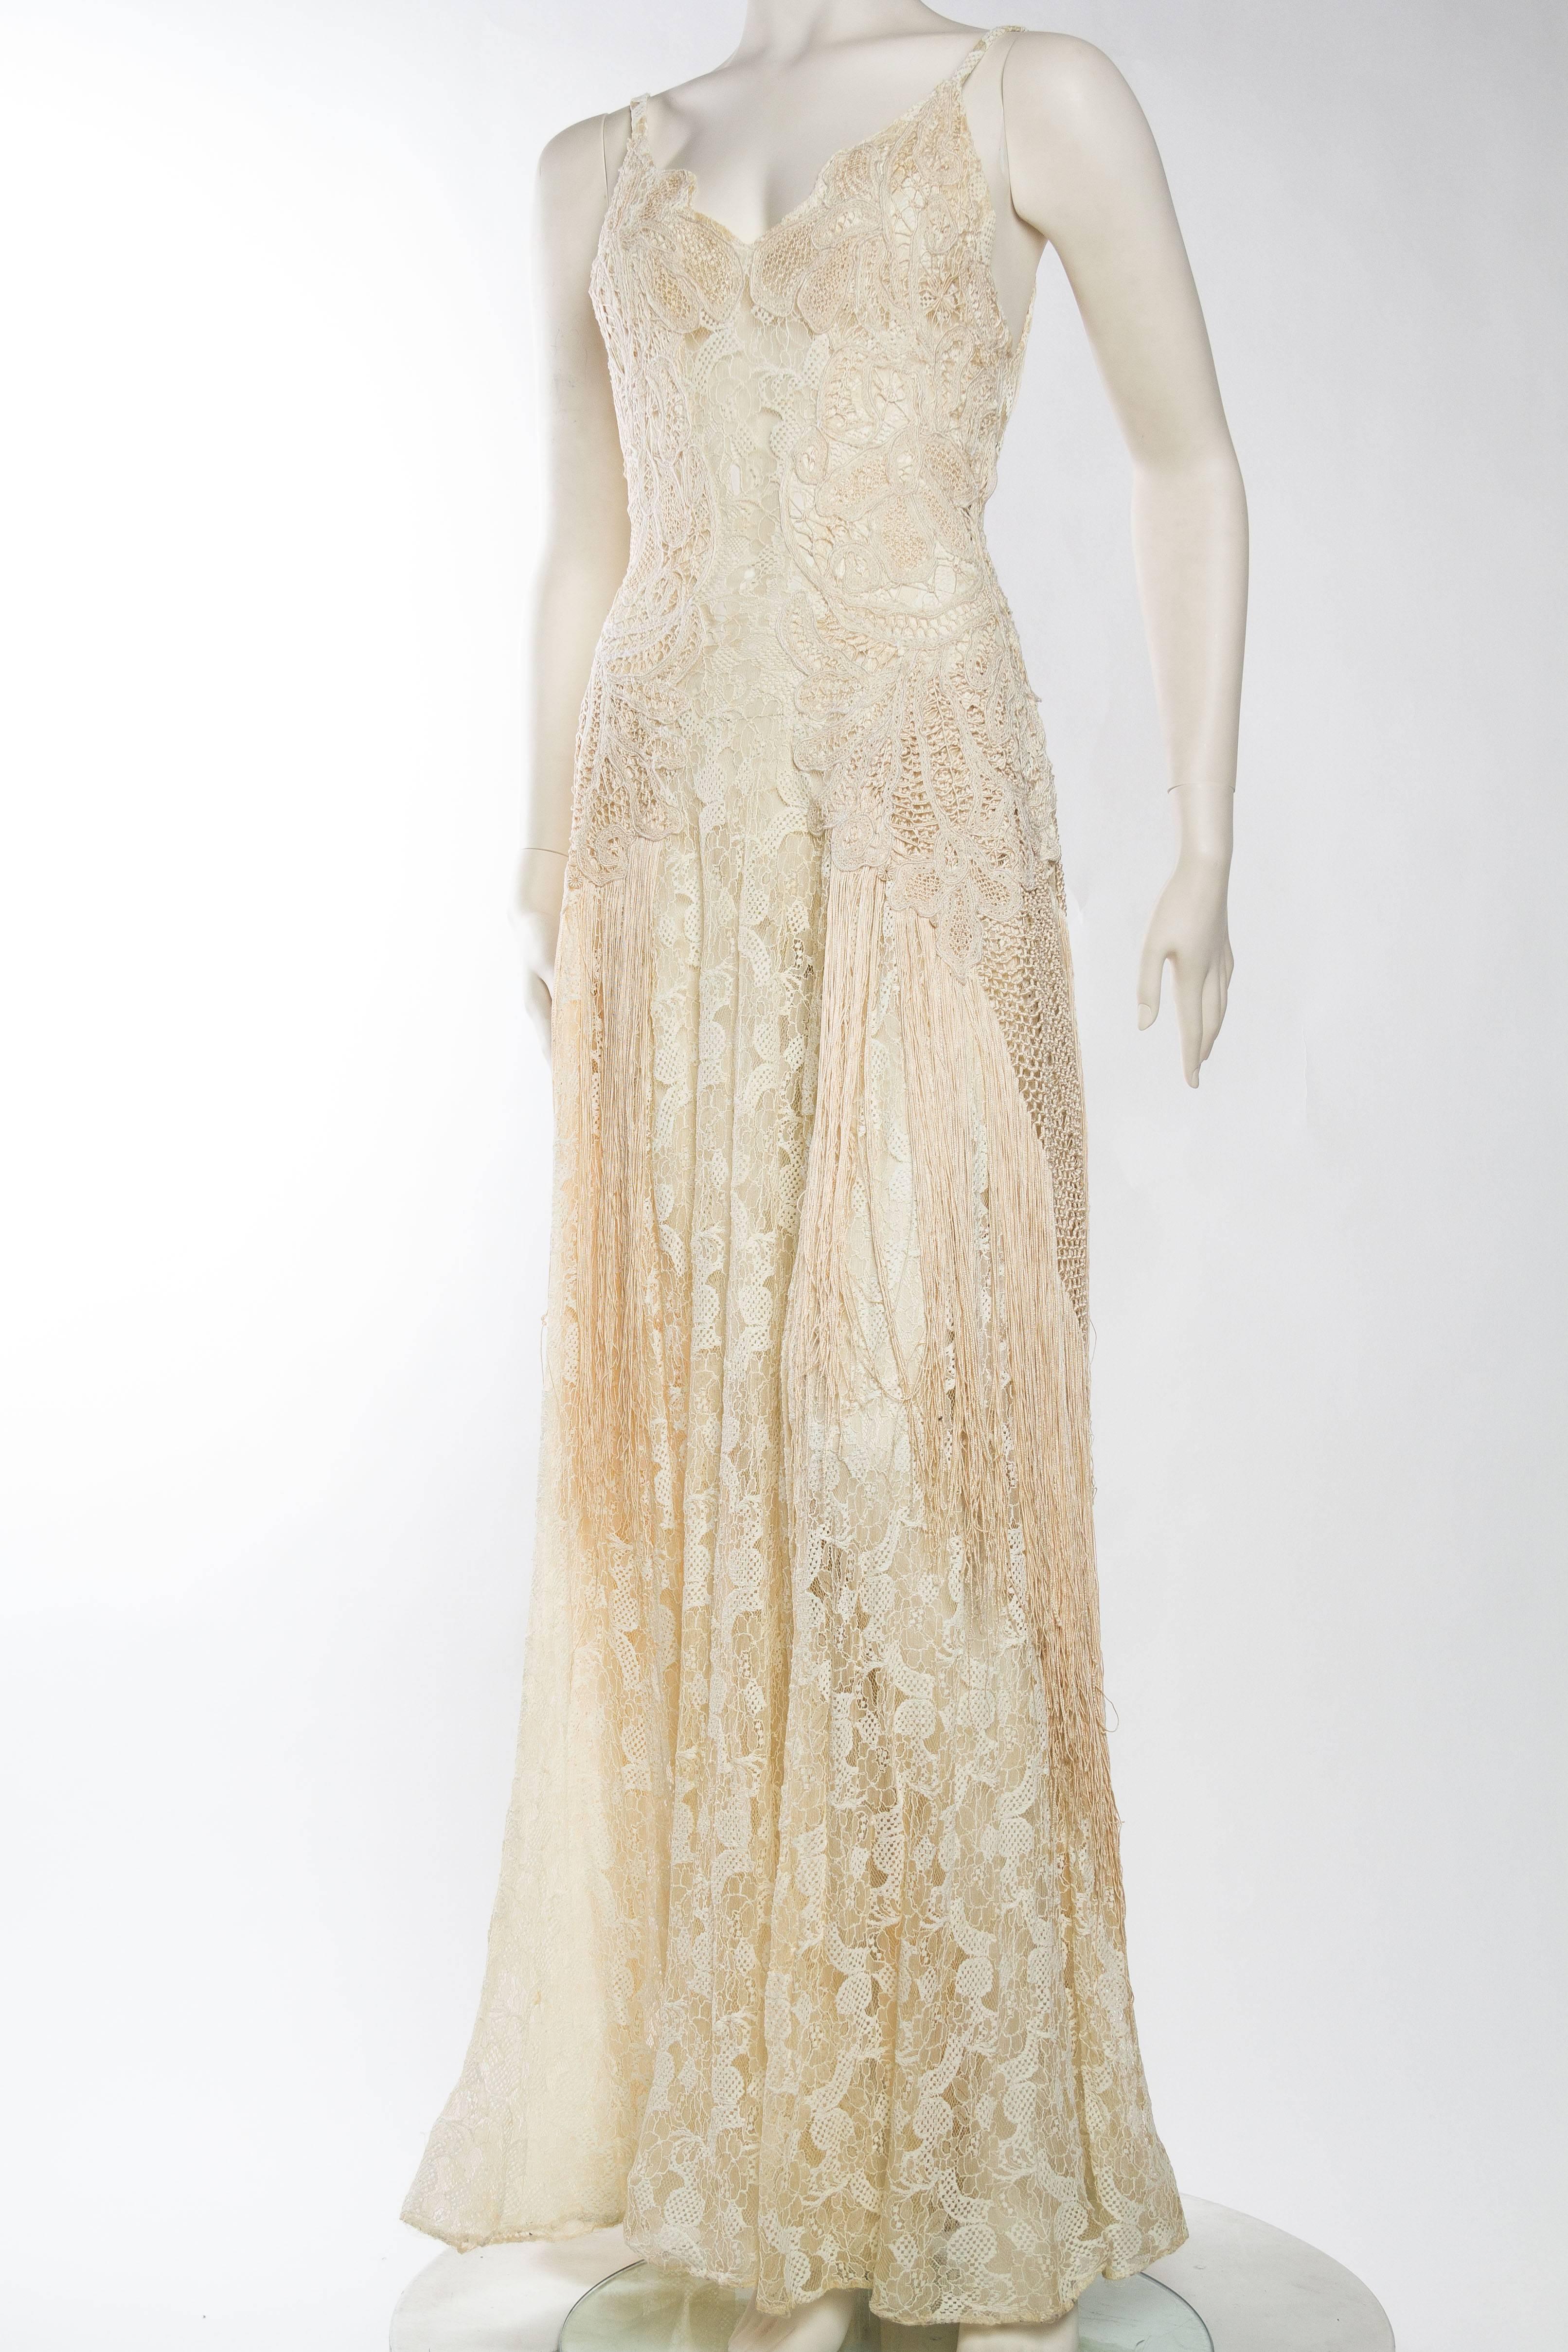 Exqusite 1930s Sheer Silk Lace Gown with Victorian Lace and Silk Fringe Rebuilt and Reworked for a Modern Woman